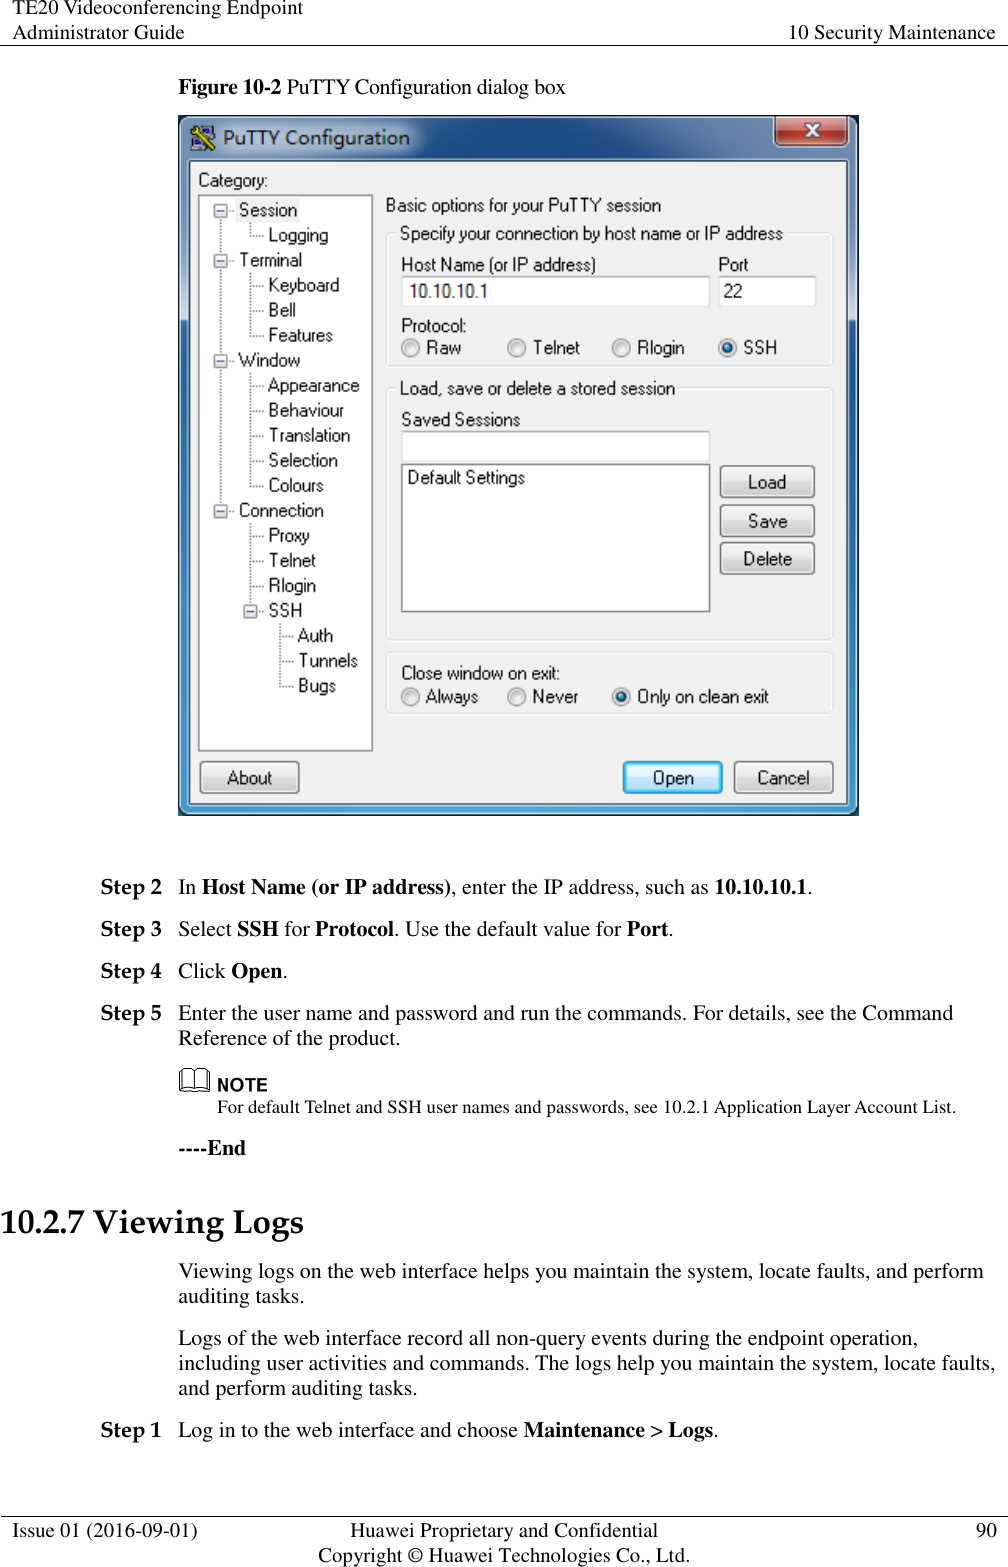 TE20 Videoconferencing Endpoint Administrator Guide 10 Security Maintenance  Issue 01 (2016-09-01) Huawei Proprietary and Confidential                                     Copyright © Huawei Technologies Co., Ltd. 90  Figure 10-2 PuTTY Configuration dialog box   Step 2 In Host Name (or IP address), enter the IP address, such as 10.10.10.1. Step 3 Select SSH for Protocol. Use the default value for Port. Step 4 Click Open. Step 5 Enter the user name and password and run the commands. For details, see the Command Reference of the product.  For default Telnet and SSH user names and passwords, see 10.2.1 Application Layer Account List. ----End 10.2.7 Viewing Logs Viewing logs on the web interface helps you maintain the system, locate faults, and perform auditing tasks. Logs of the web interface record all non-query events during the endpoint operation, including user activities and commands. The logs help you maintain the system, locate faults, and perform auditing tasks. Step 1 Log in to the web interface and choose Maintenance &gt; Logs. 